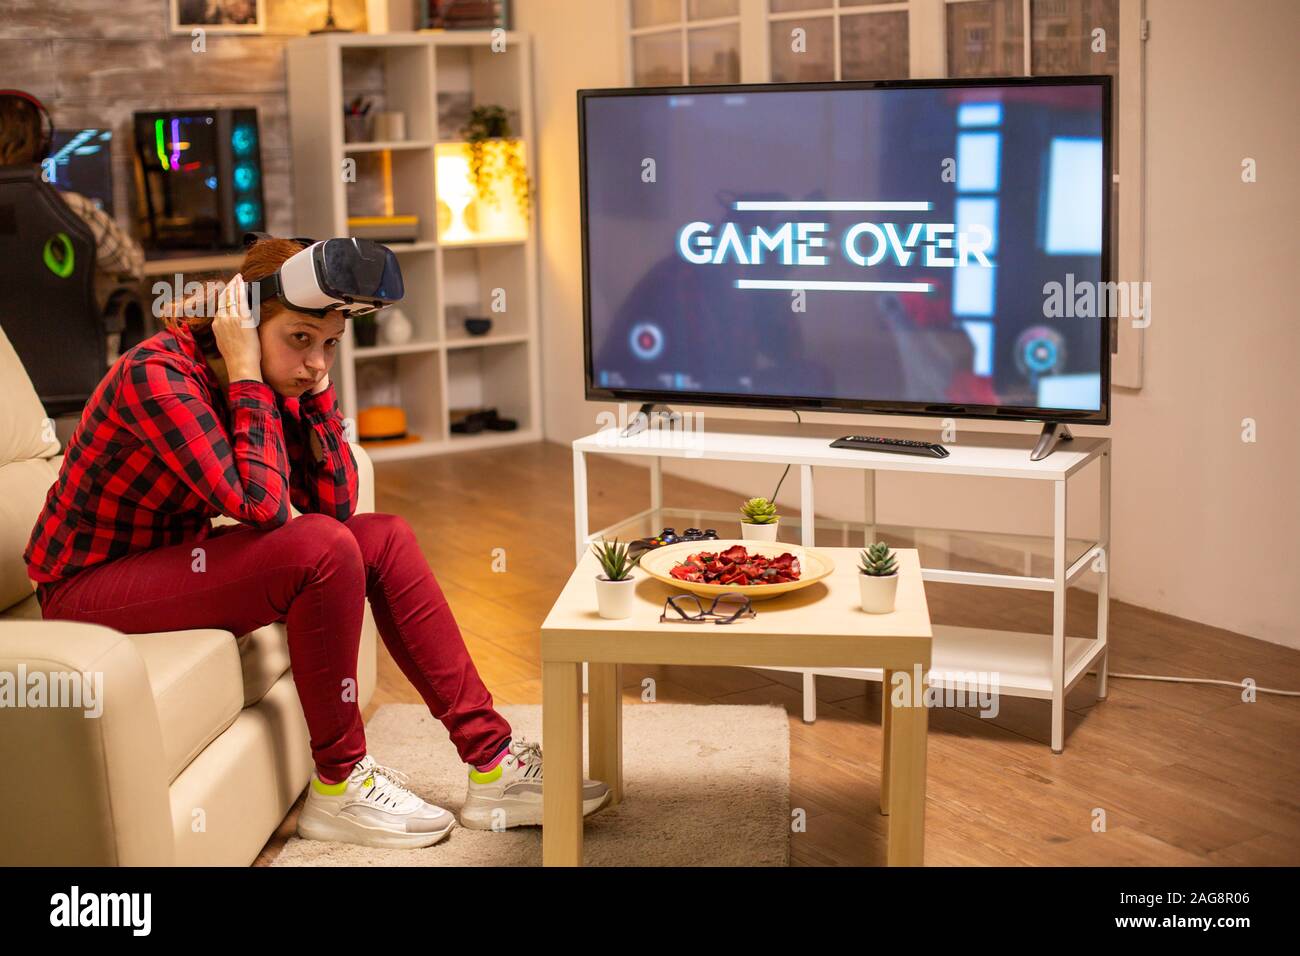 Woman losing at video games while playing using virtual reality headset late at night in the living room Stock Photo